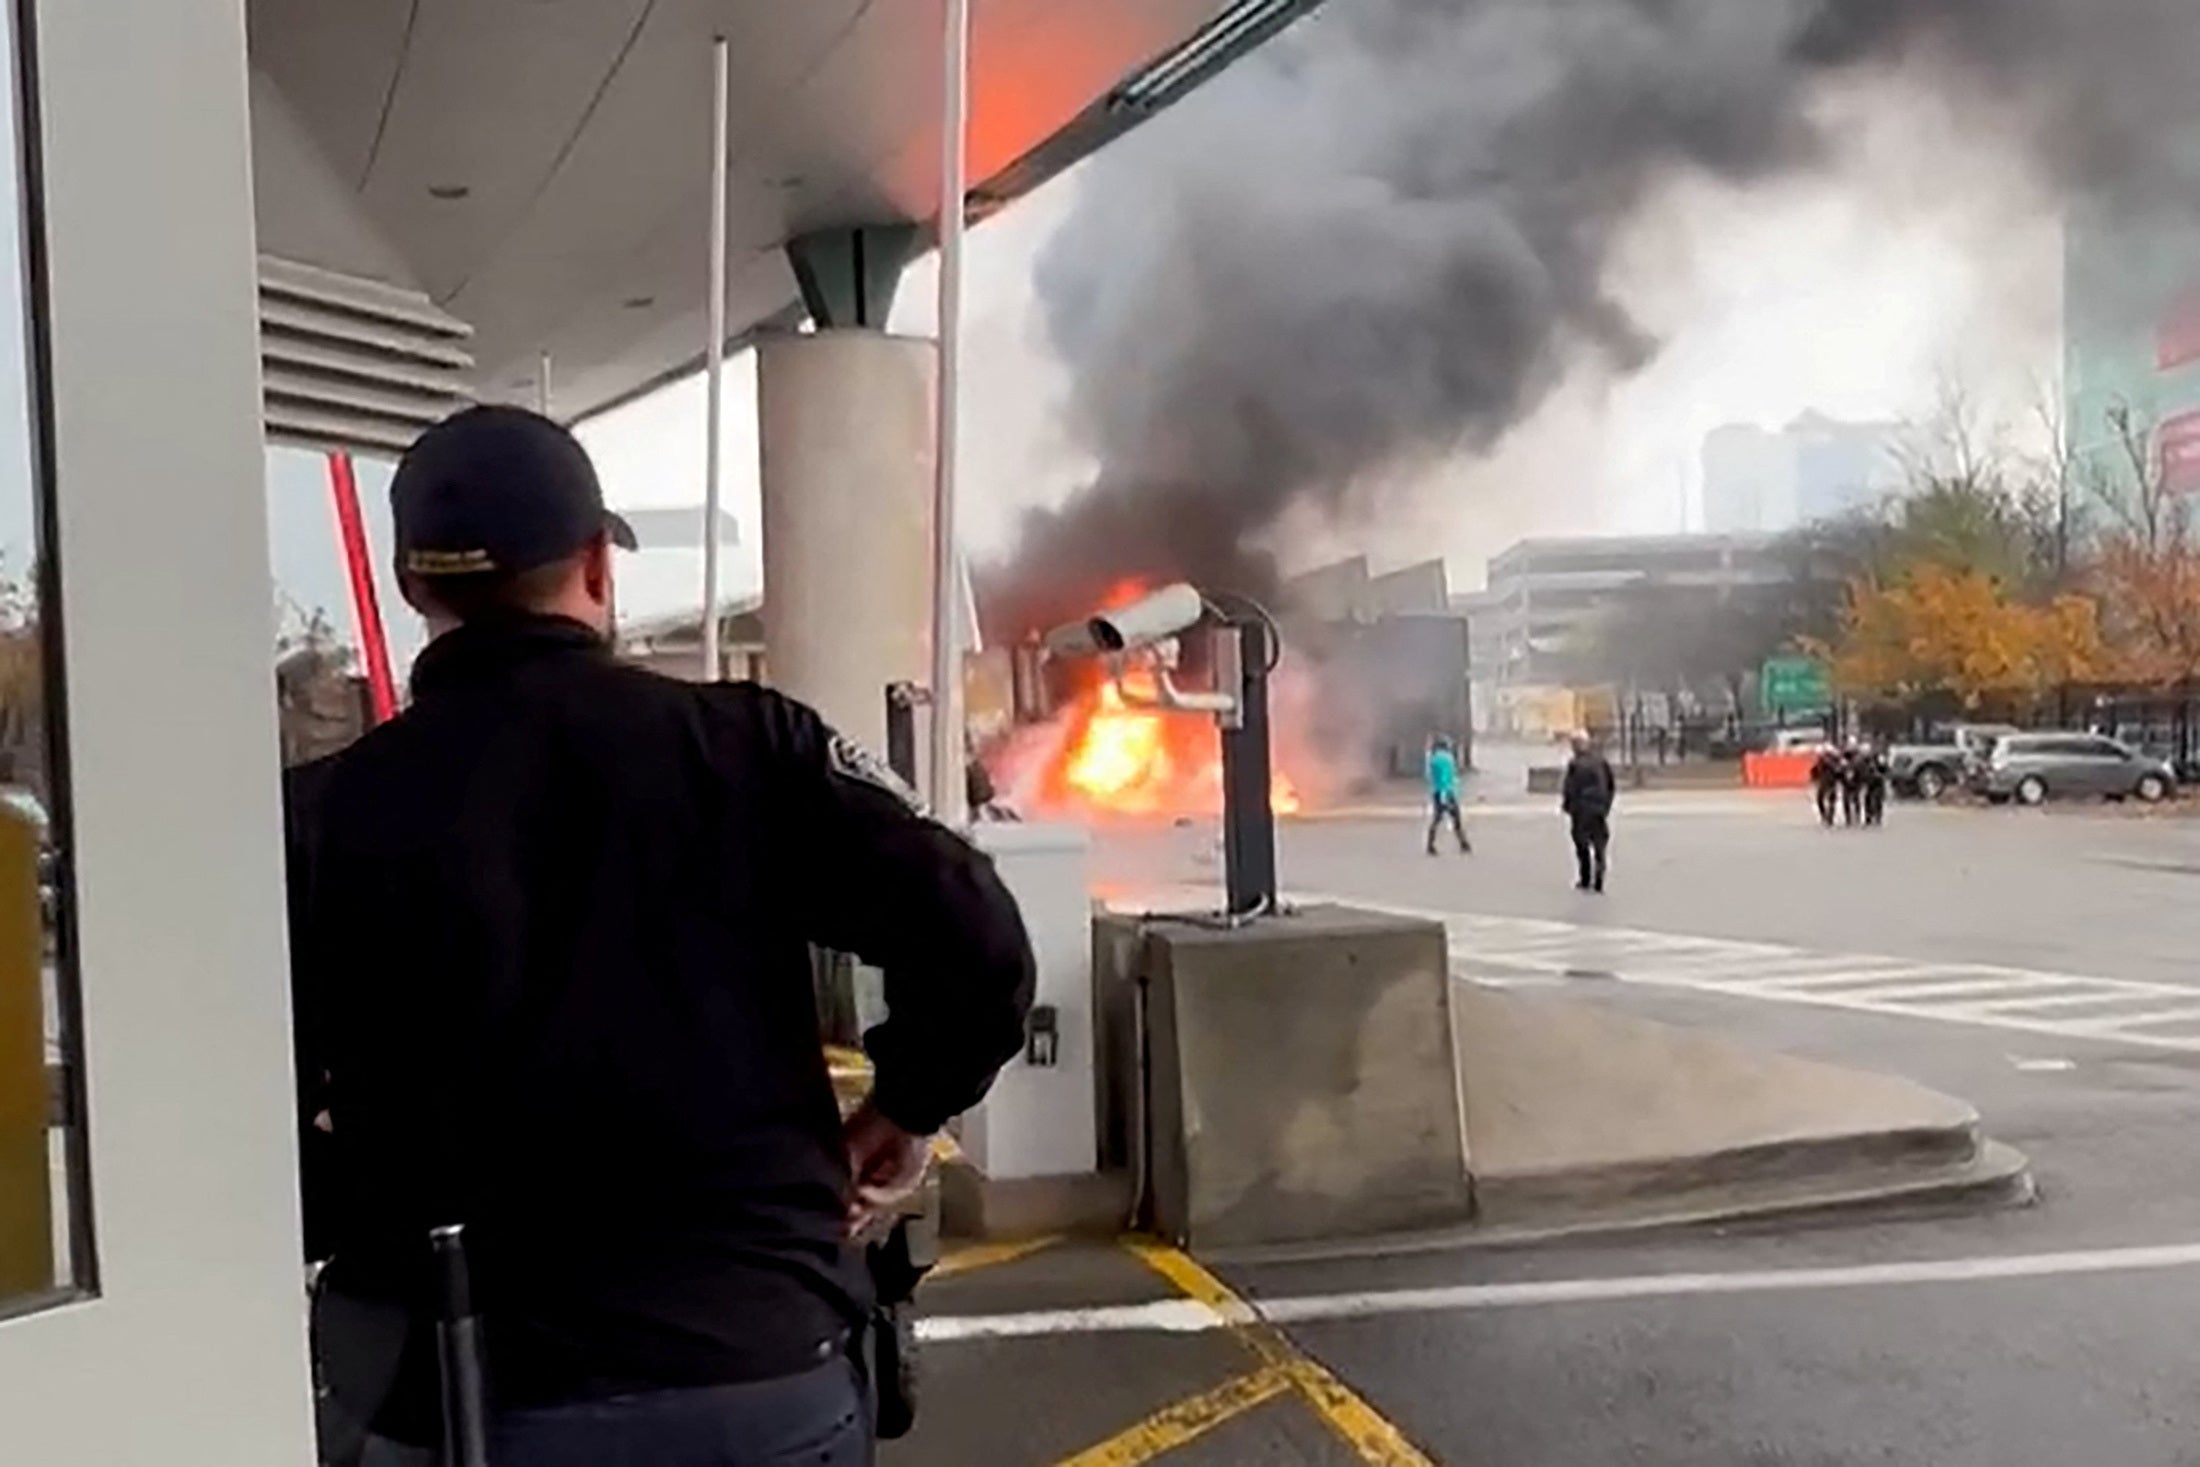 A Customs and Border Protection officer watches a car on fire at an entry point.